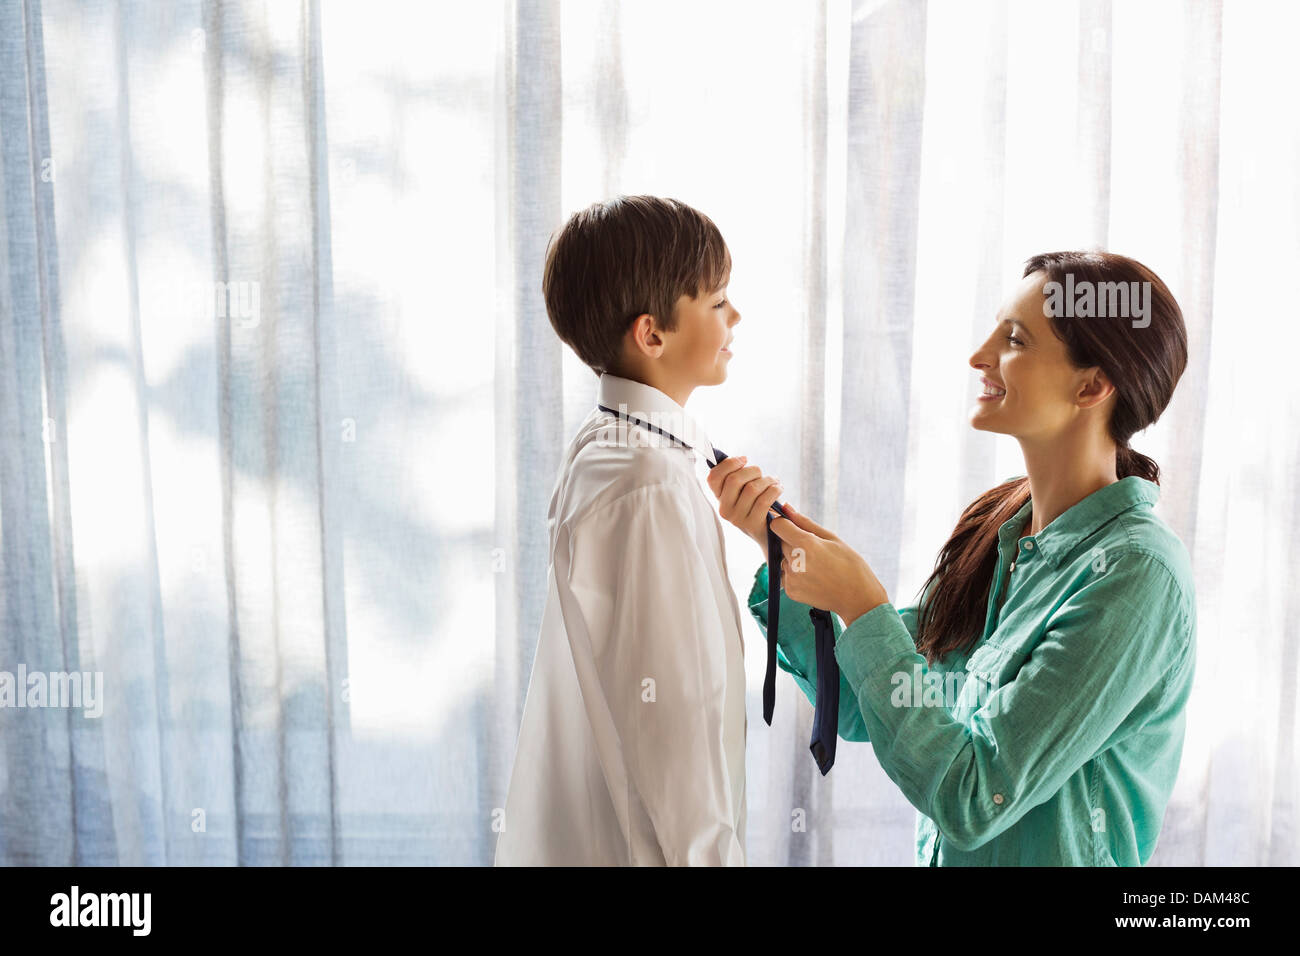 Mother tying son's tie at window Stock Photo